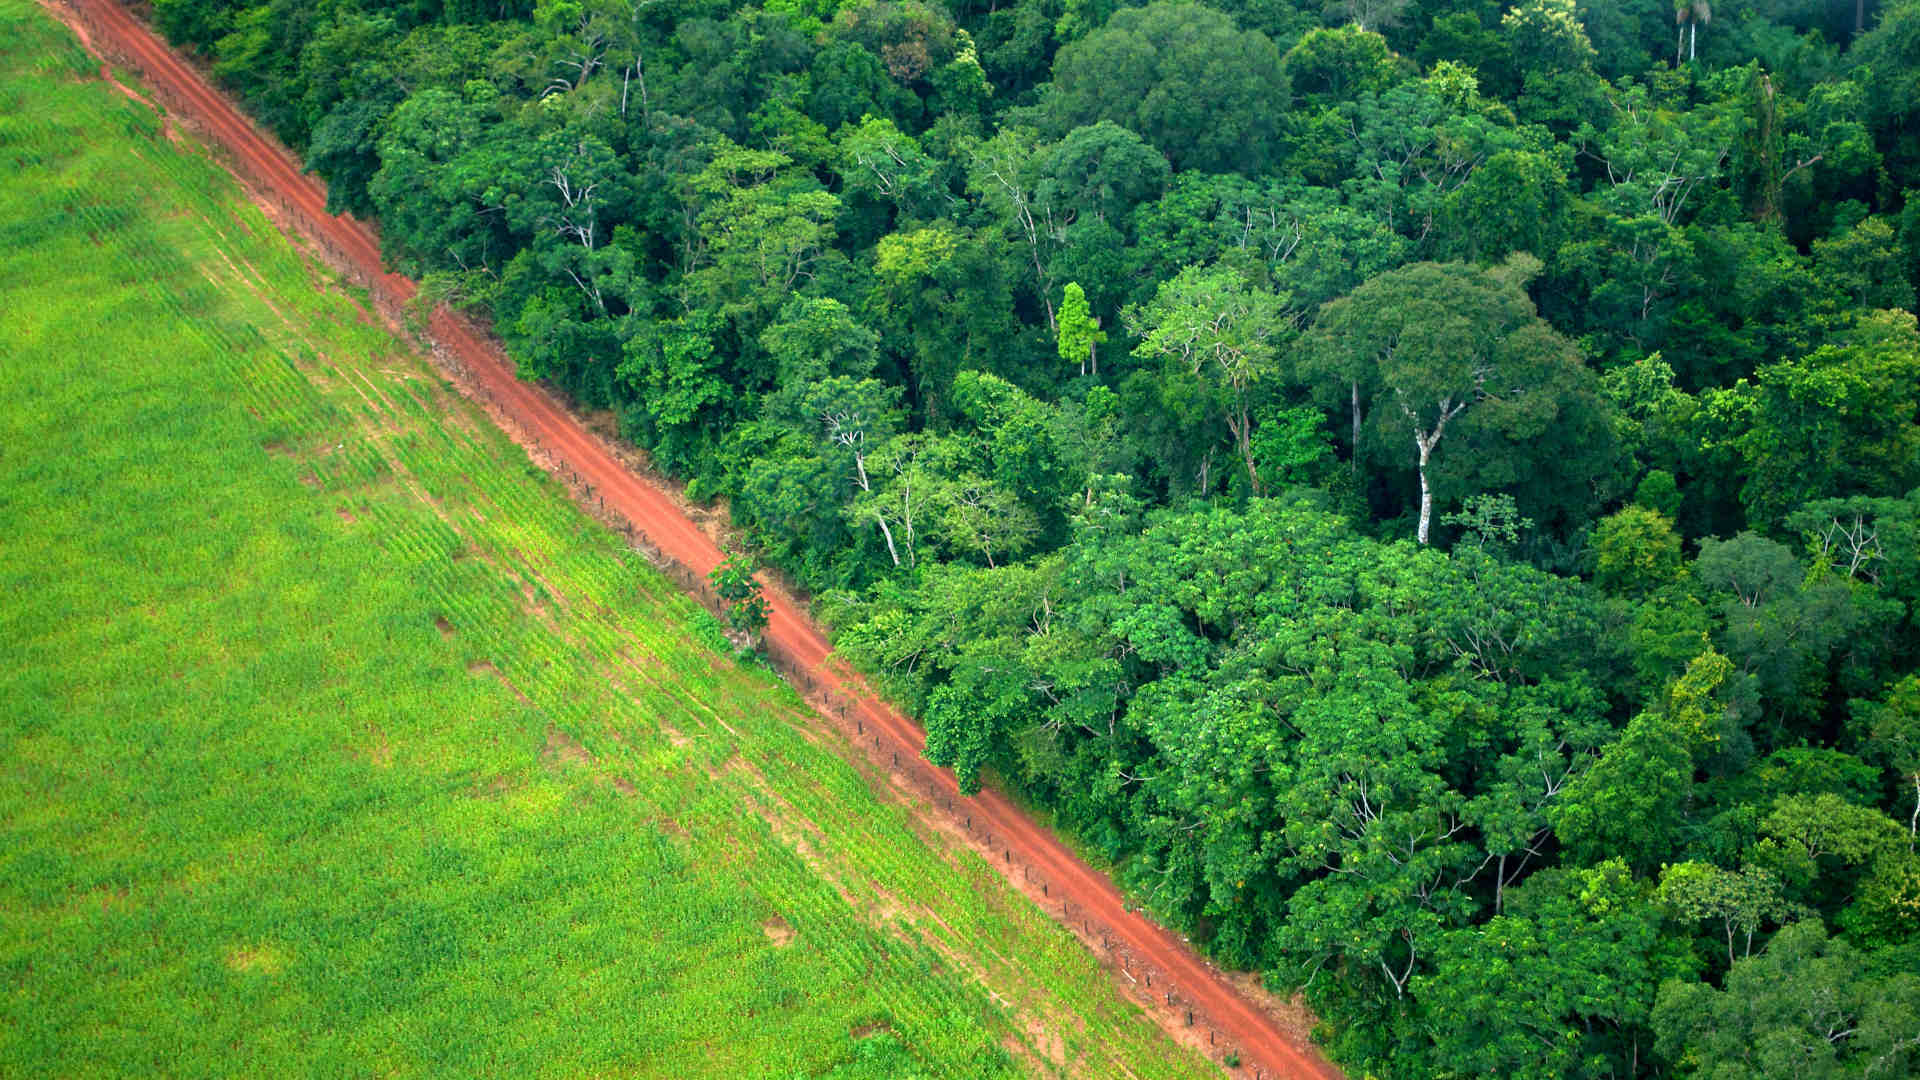 An aerial shot shows the contrast between forest and agricultural landscapes near Rio Branco, Acre, Brazil.